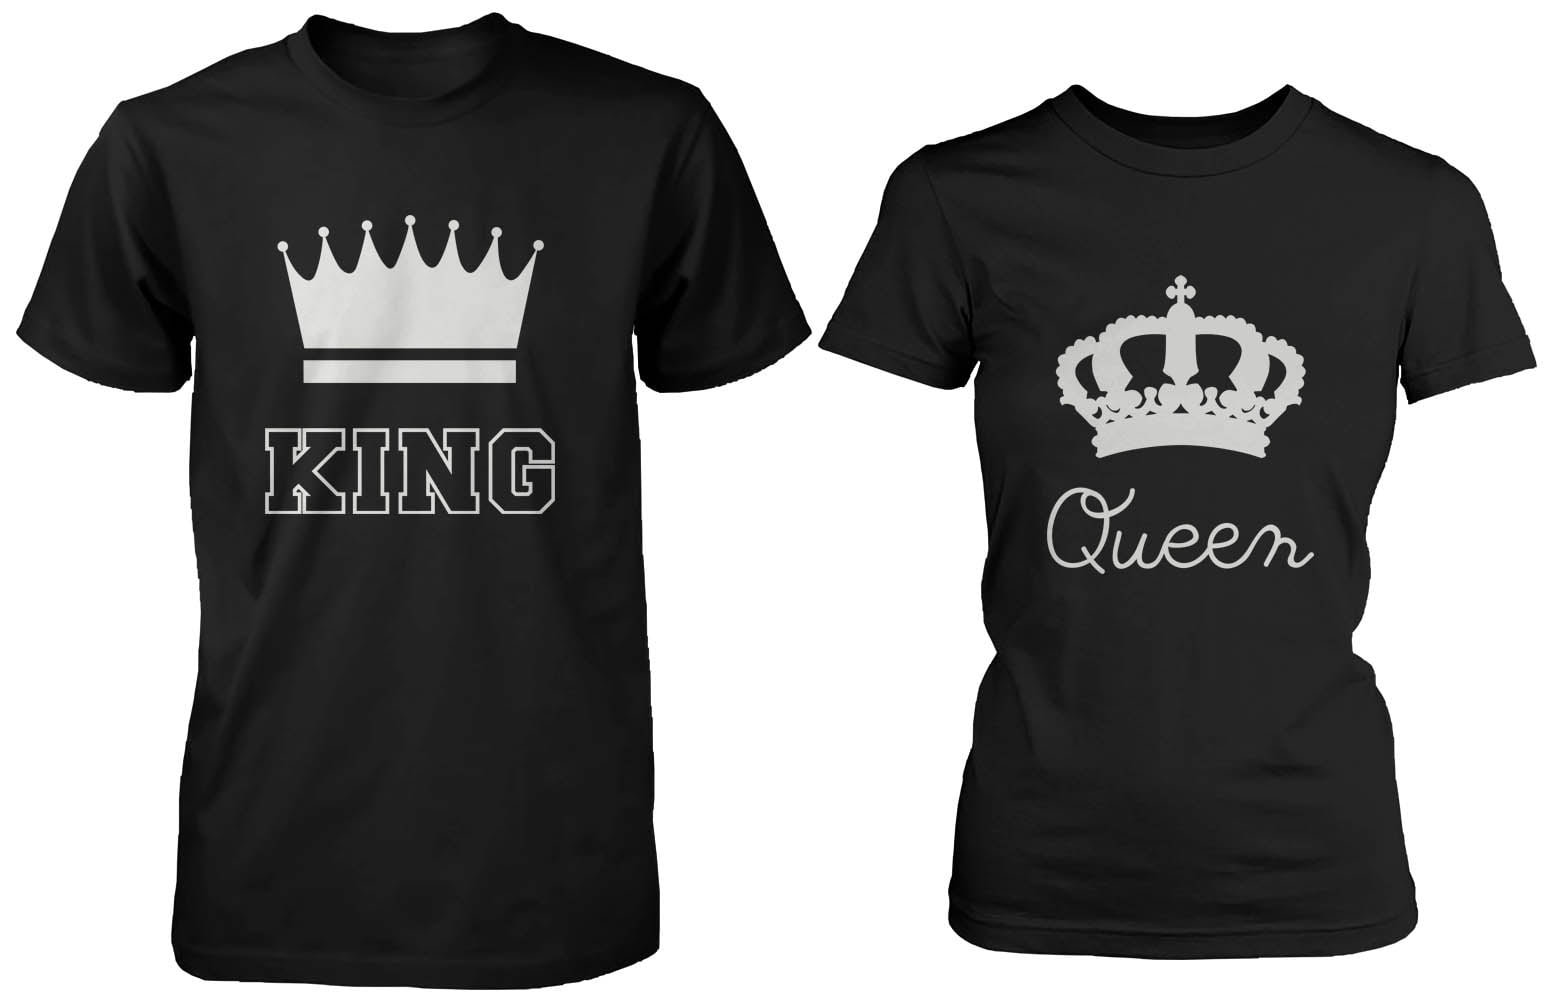 King and Queen Matching Couple Shirts Outfits His and Hers T-Shirts